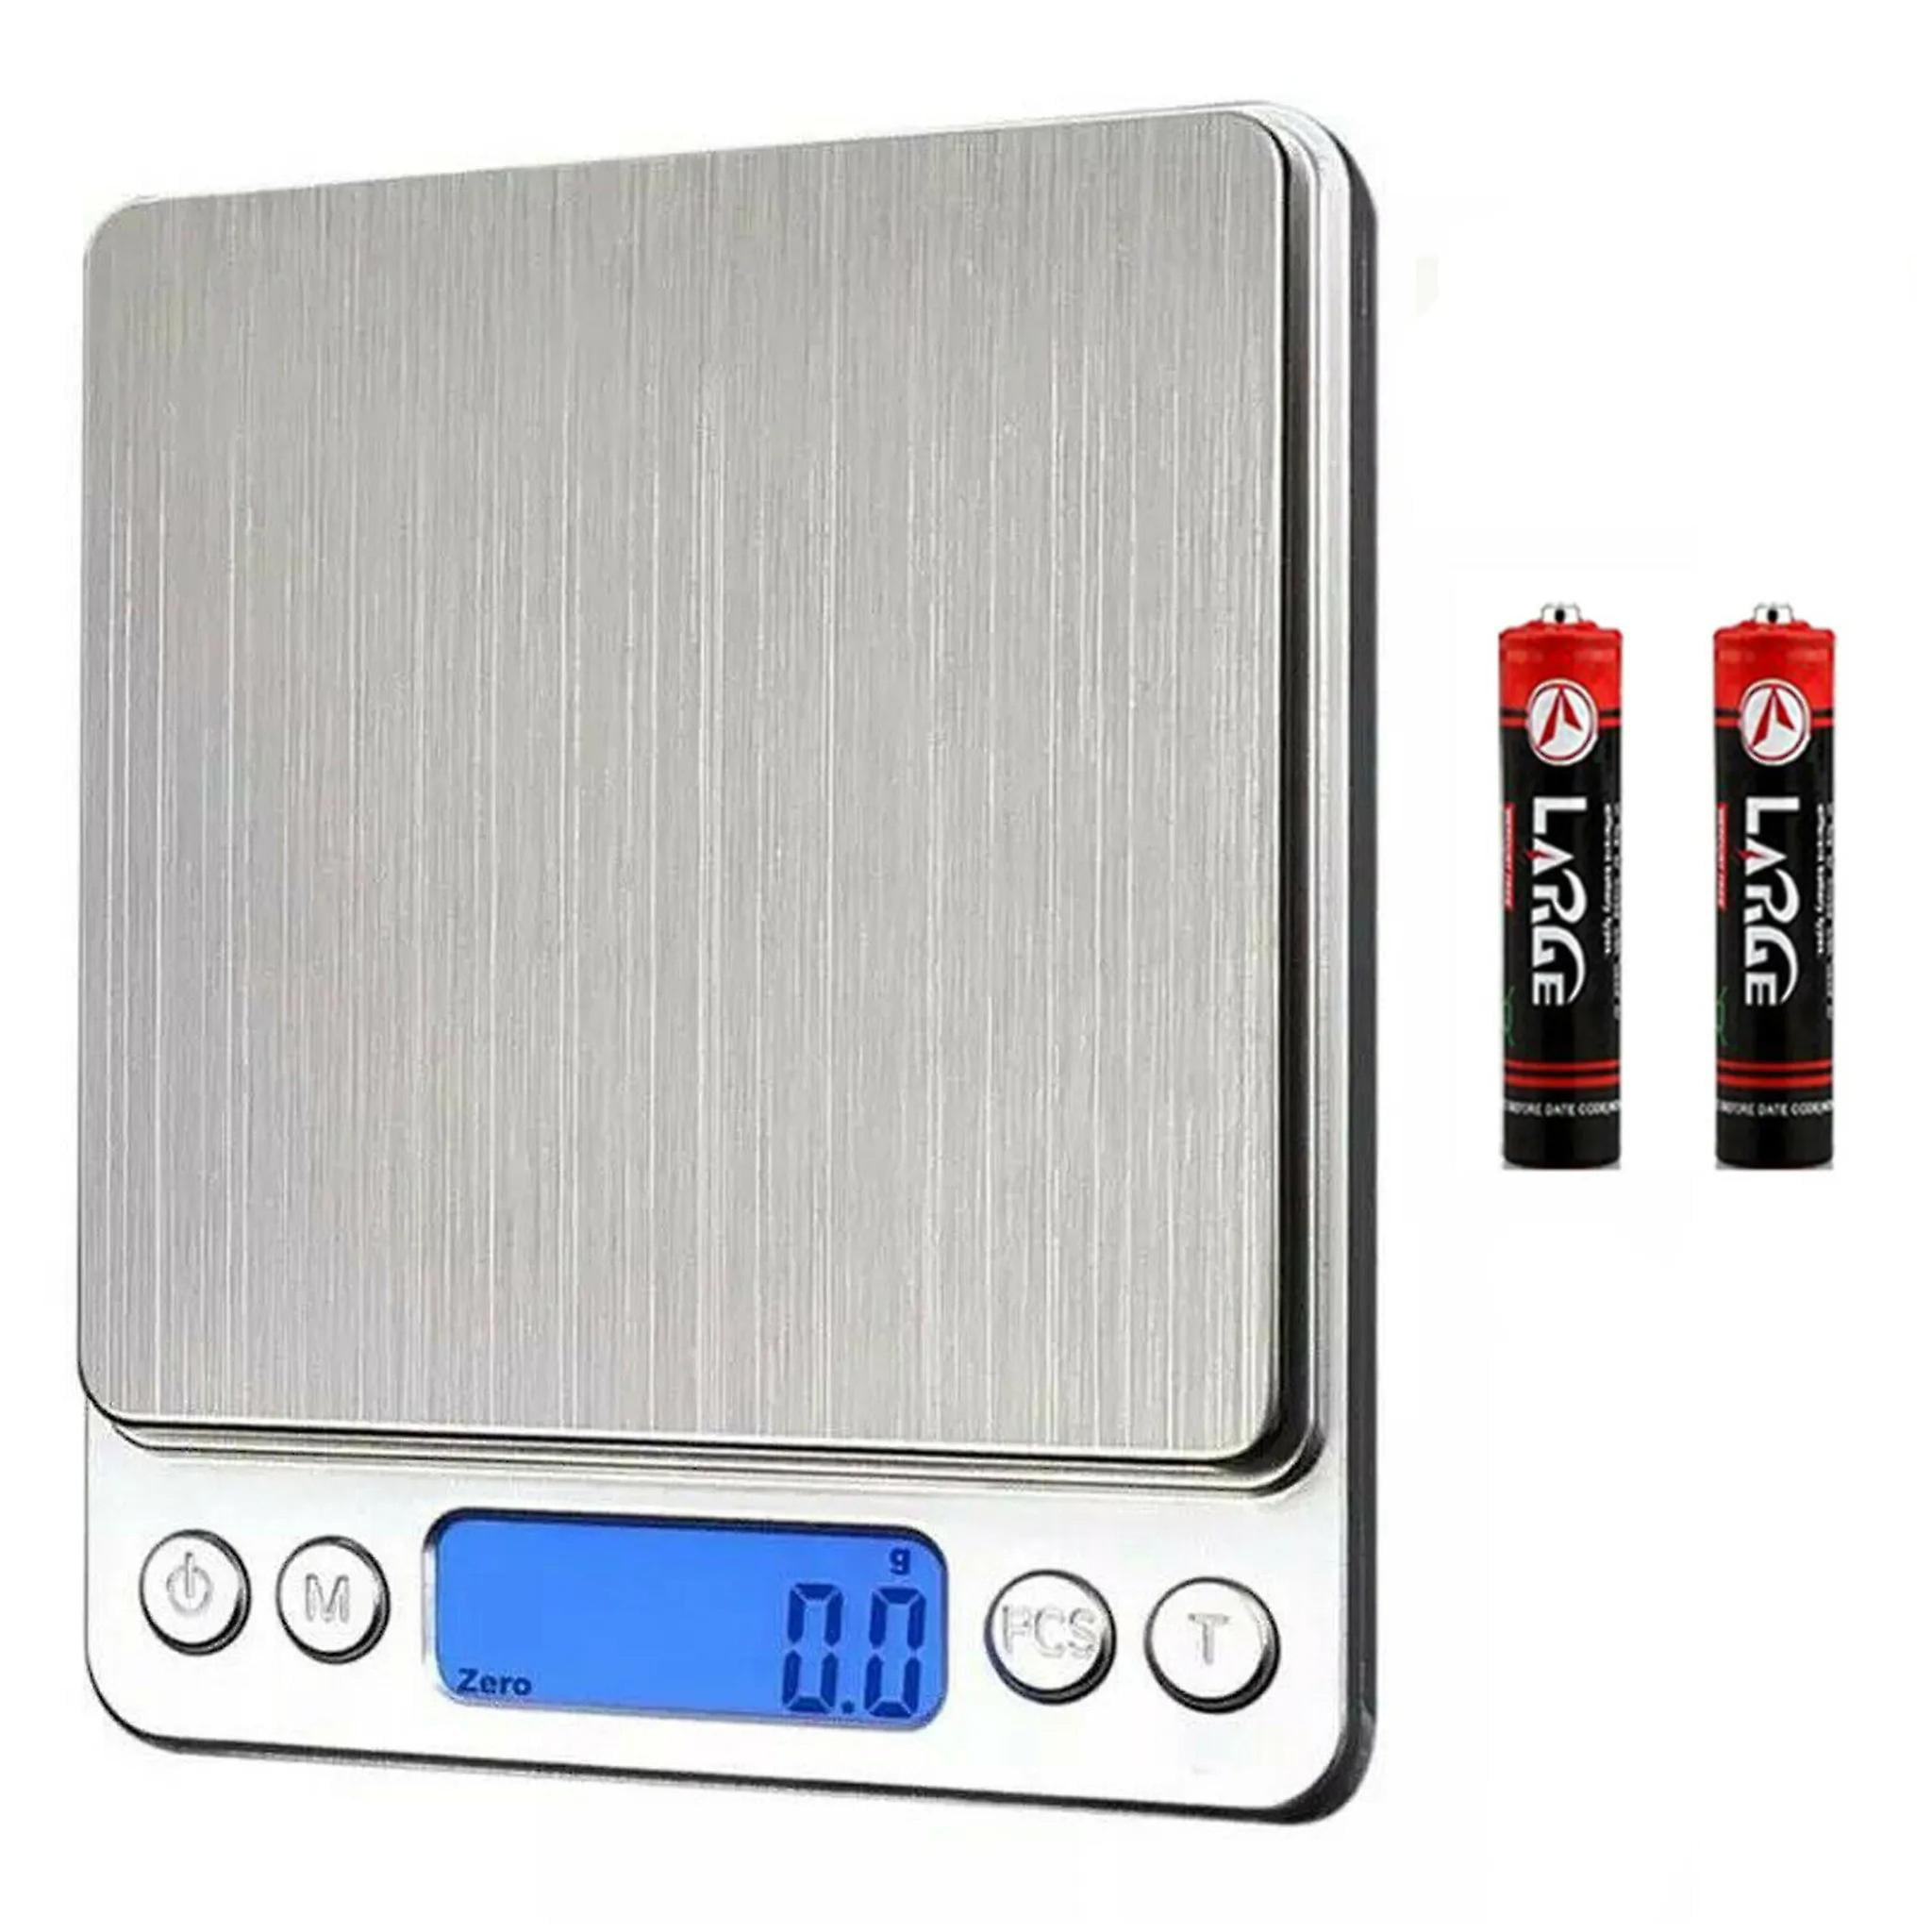 Stainless Steel-Lit LCD Display Portable Small Electronic Weighing Scales Kitchen（0.1g to 3kg）with 2 Trays Mini Size Measurement Gram 4 Buttons/PCS Function Digital Kitchen Scales 